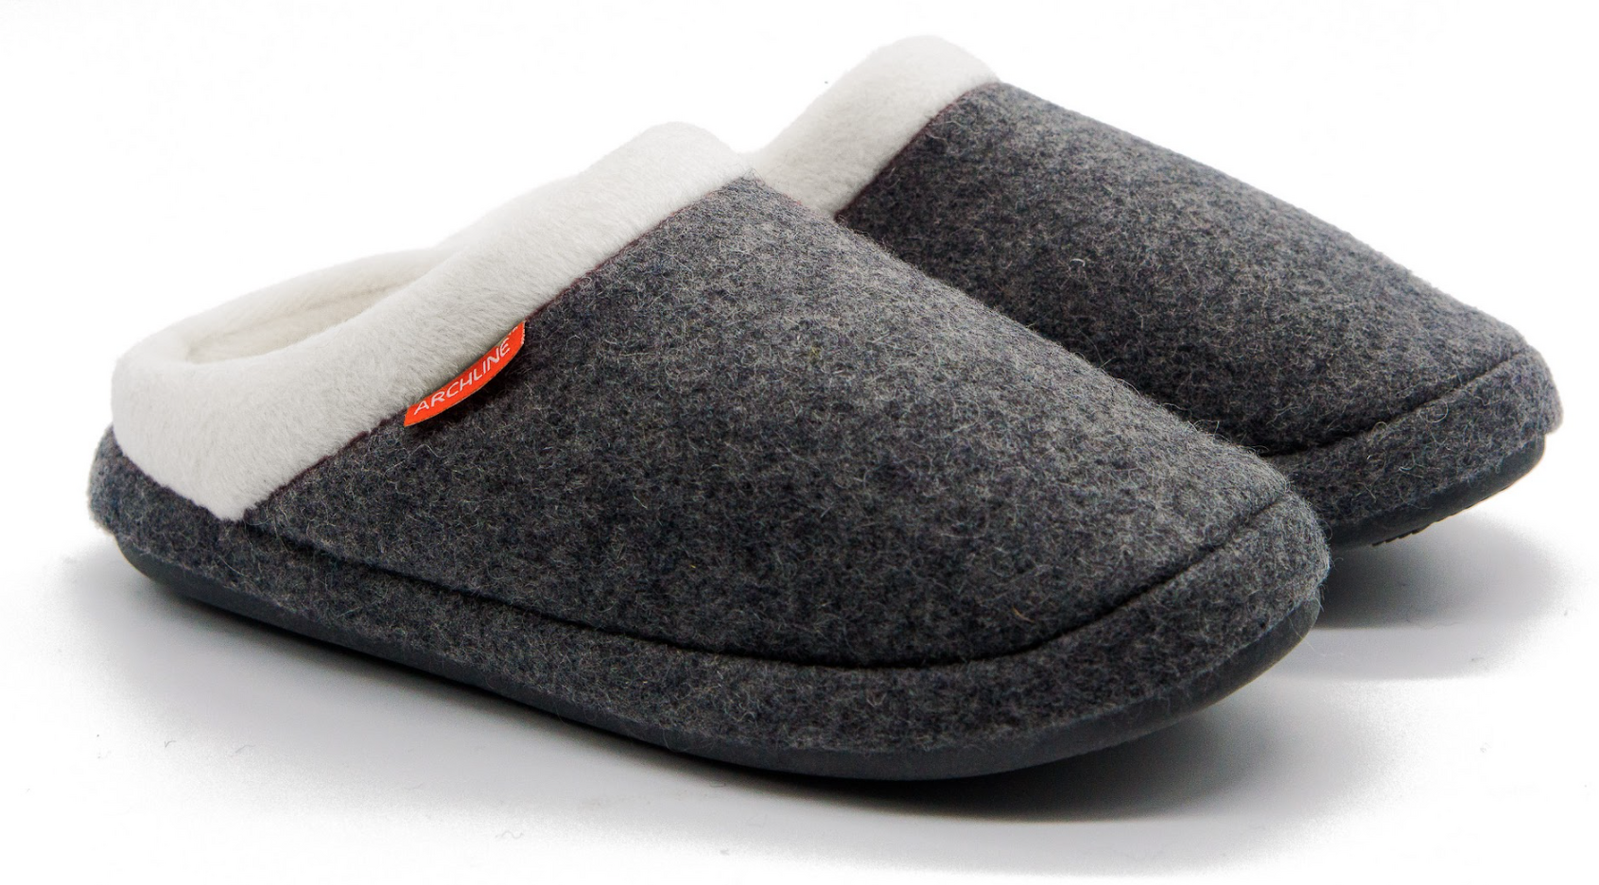 Orthotic Slippers Slip On Arch Scuffs Orthopedic Moccasins - Grey Marle - EUR 44